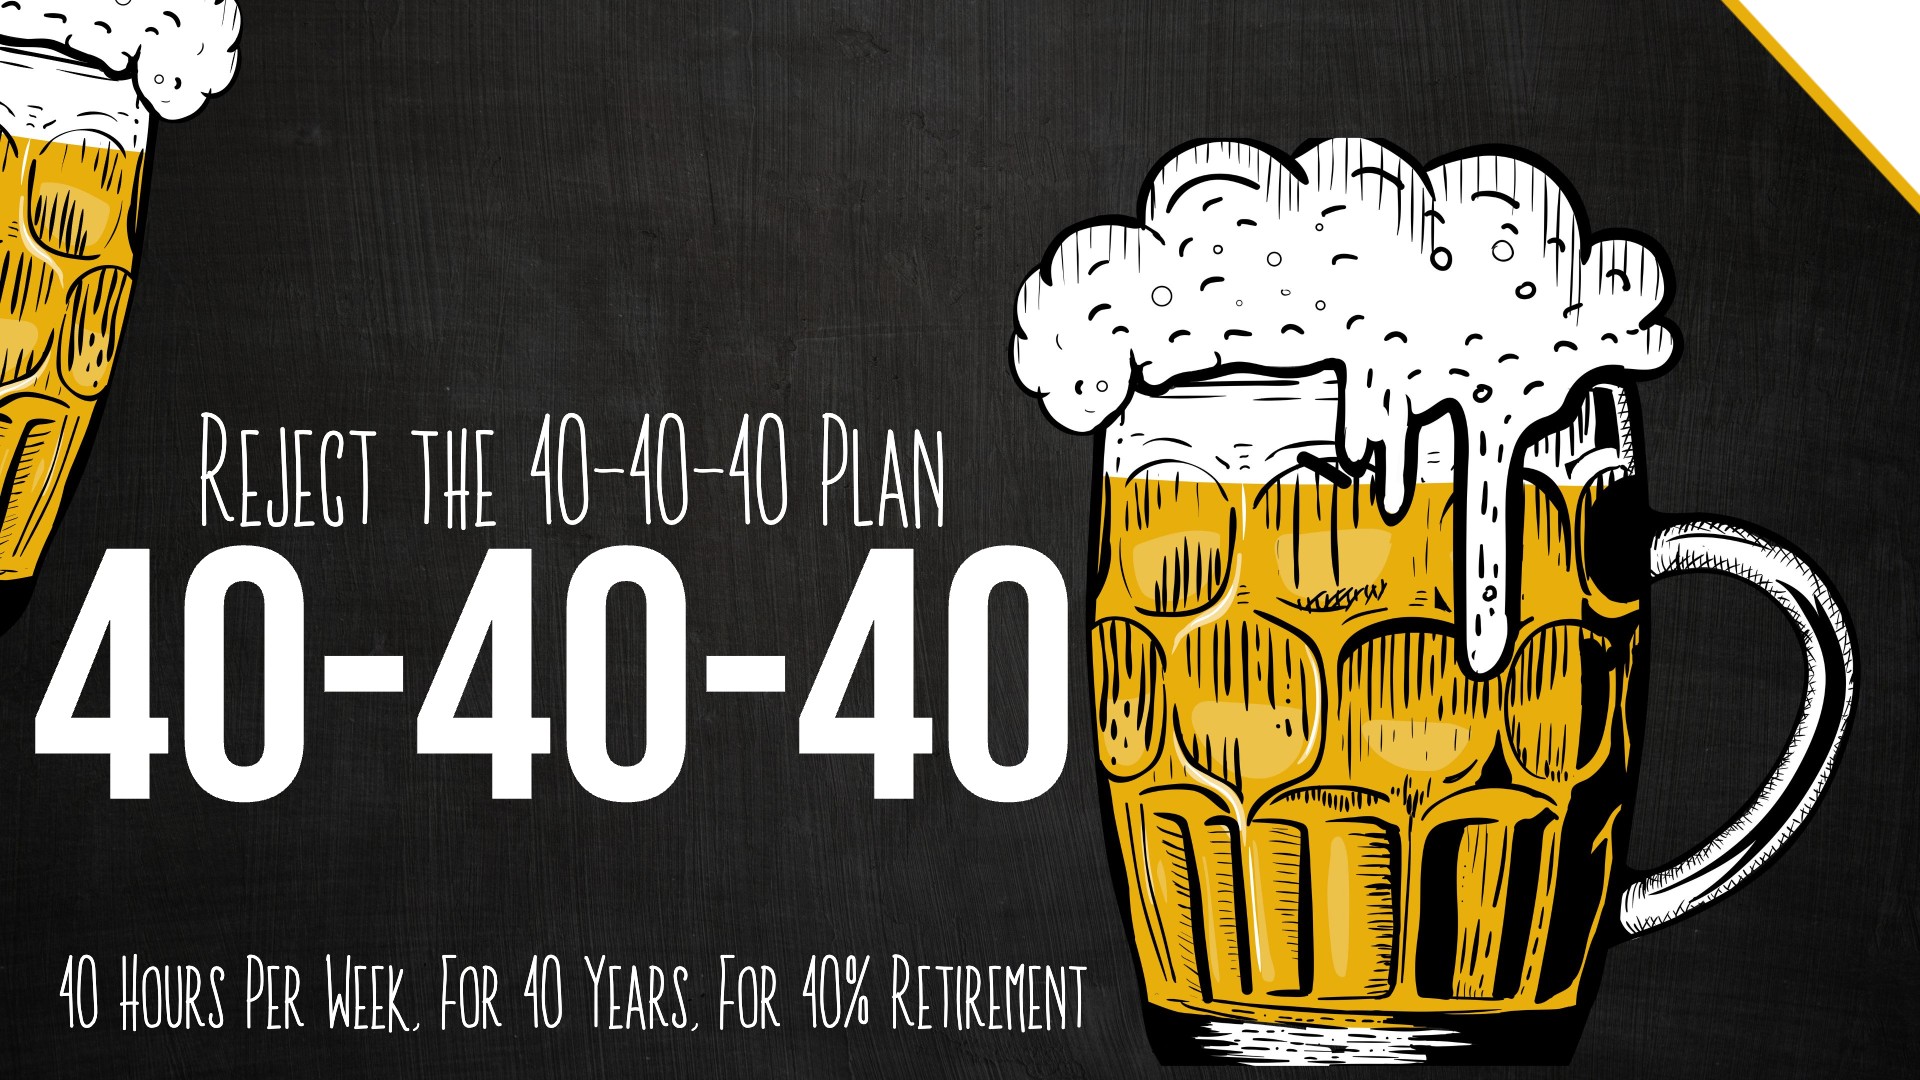 Reject the 40-40-40 Plan: 40 Hours Per Week, For 40 Years, For 40% Retirement